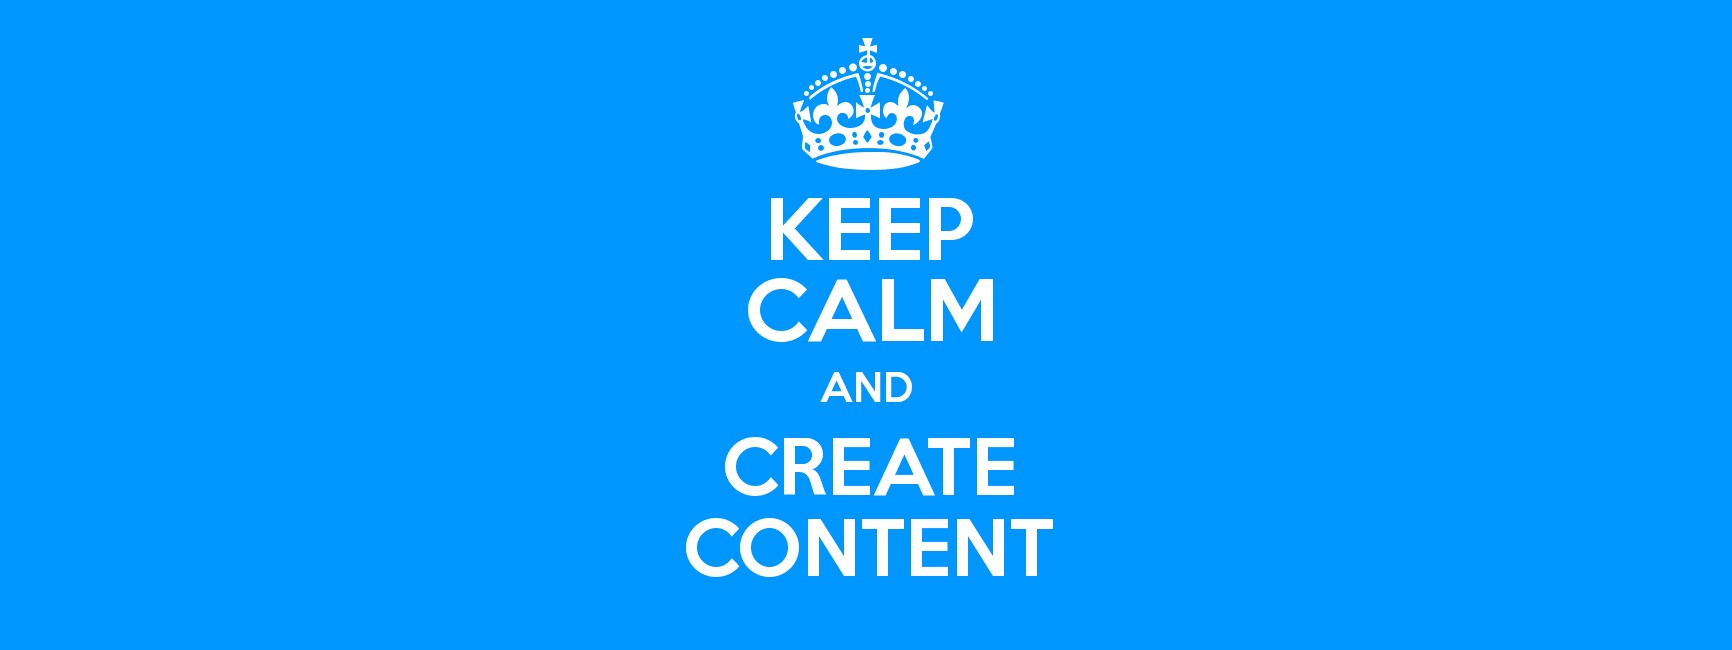 Keep Calm And Create Content Poster